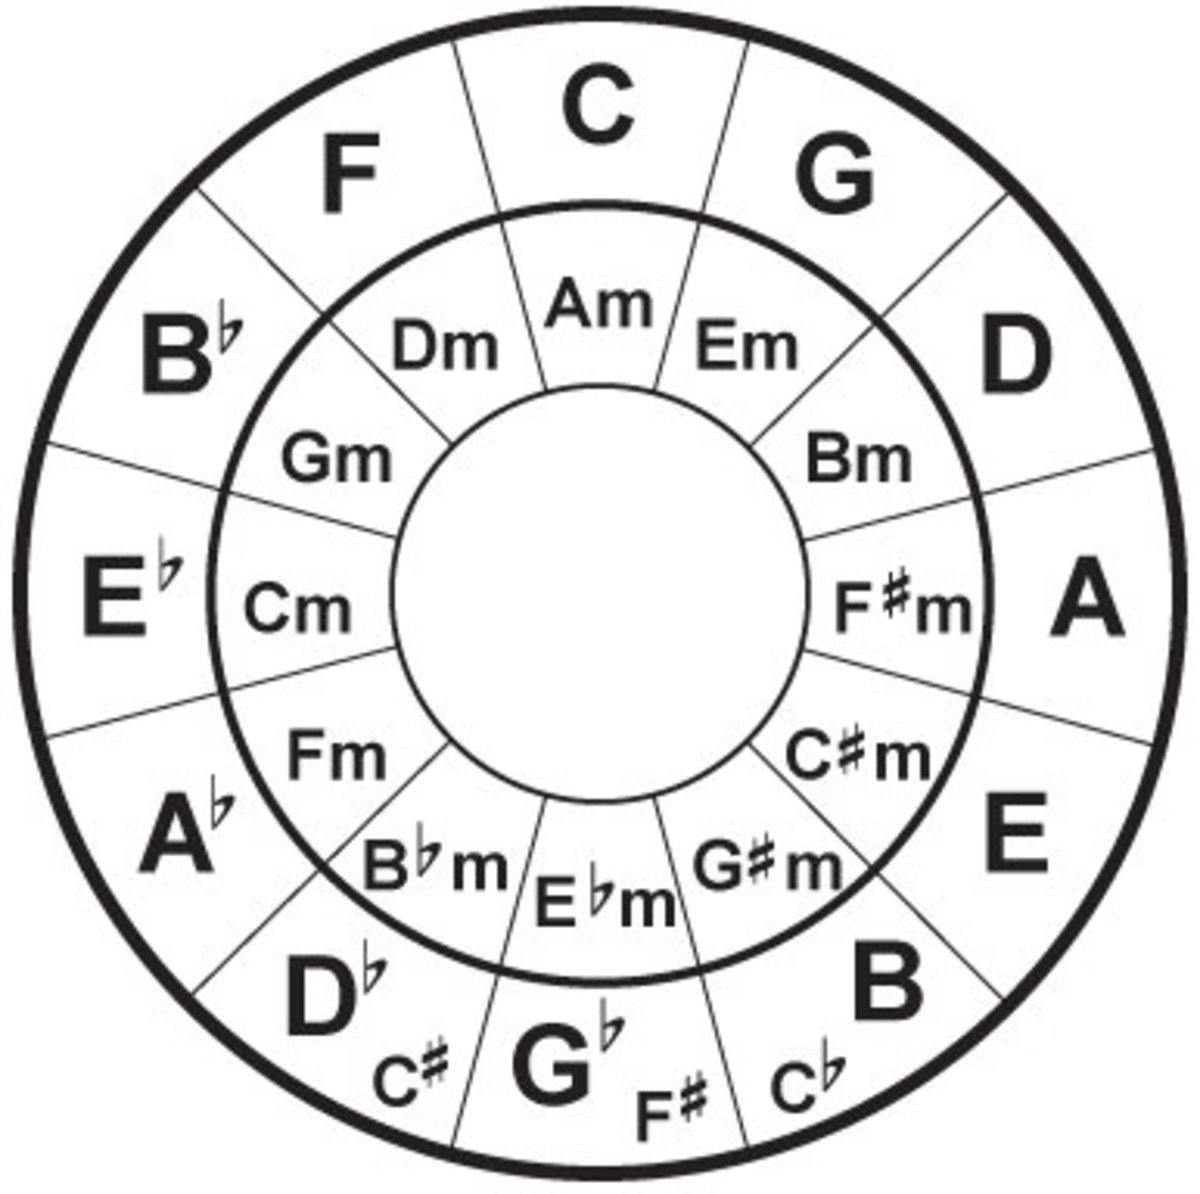 Easy Circle of Fifths Chords for R&B | Spinditty printable circle of fifths diagram pdf 